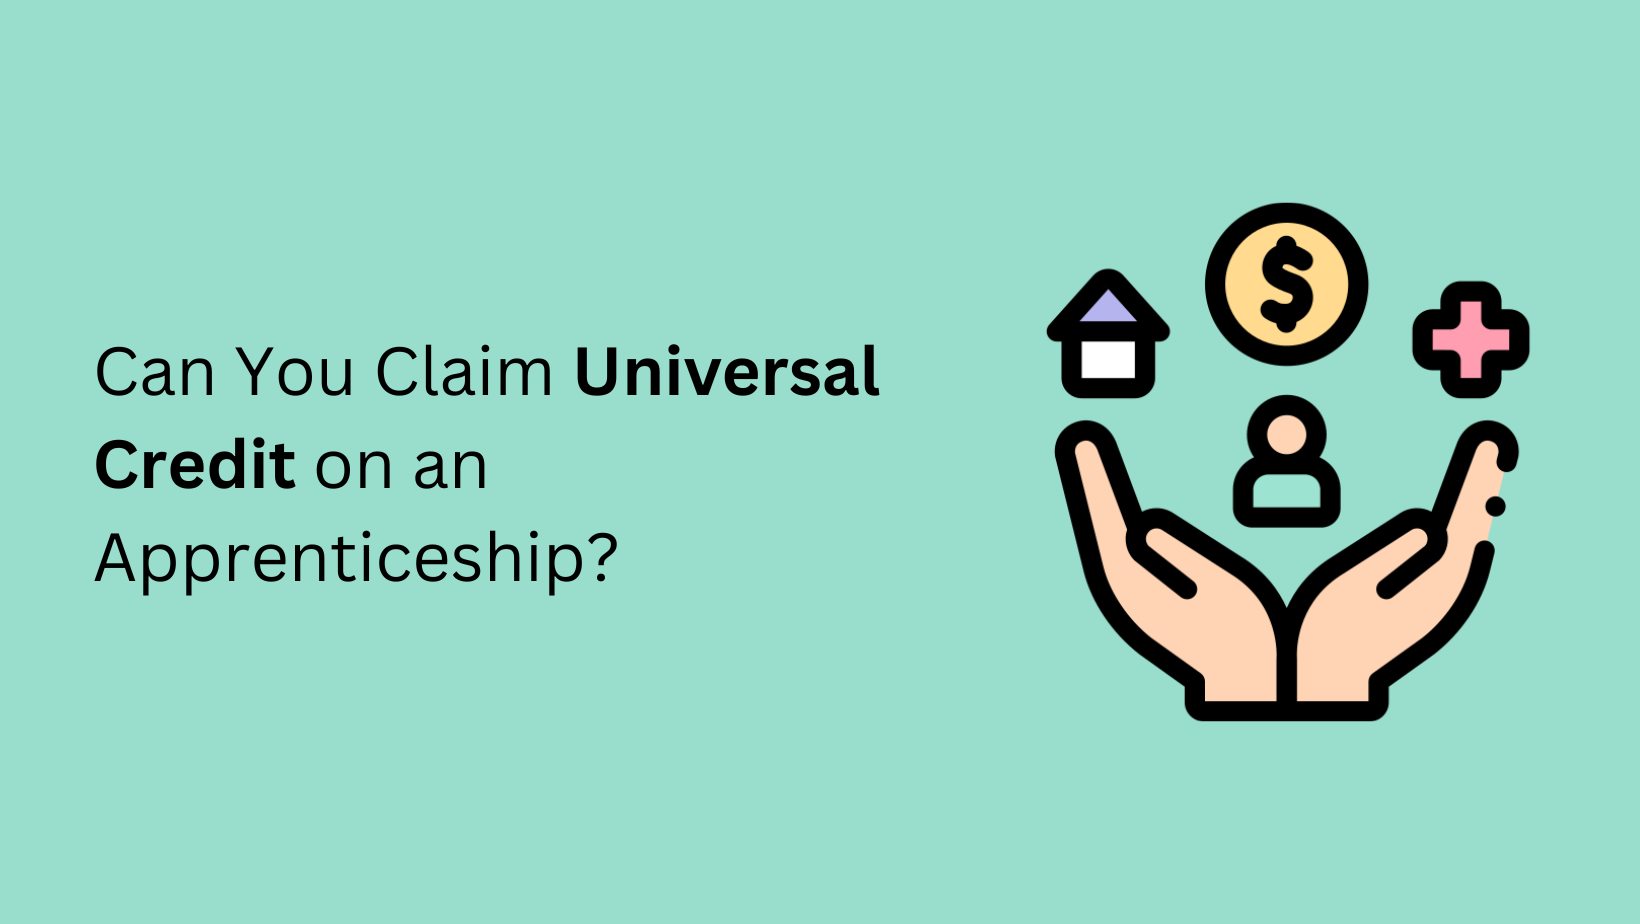 Can You Claim Universal Credit on an Apprenticeship